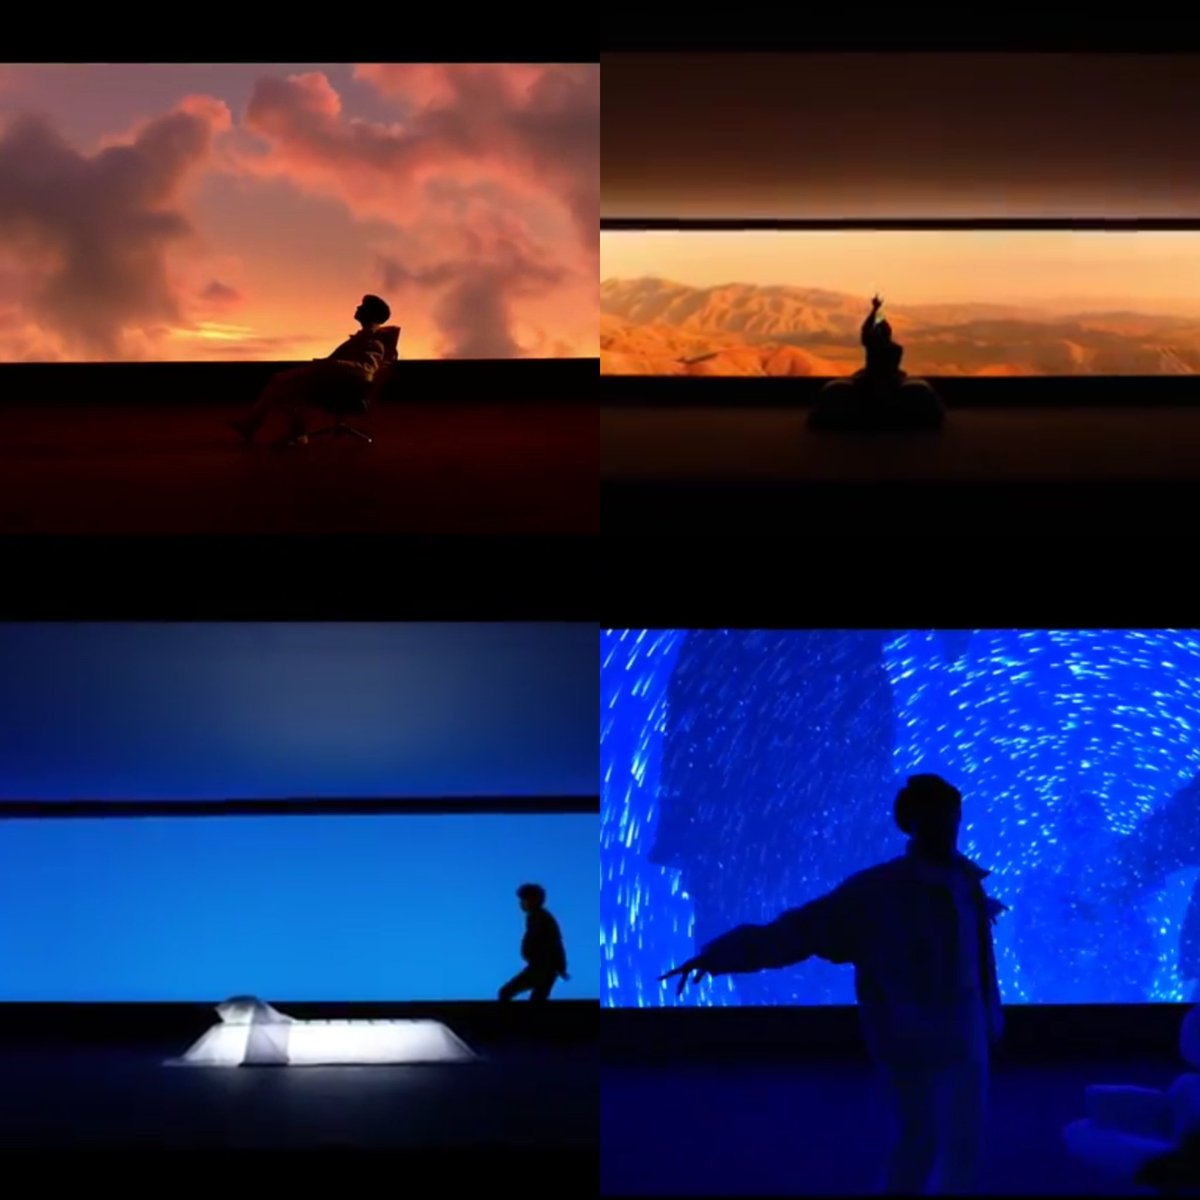 The sky, the land, the water and the universe. This guy has dominated everydomain. Hats off to the king.
#airplane #HopeWorld @BTS_twt